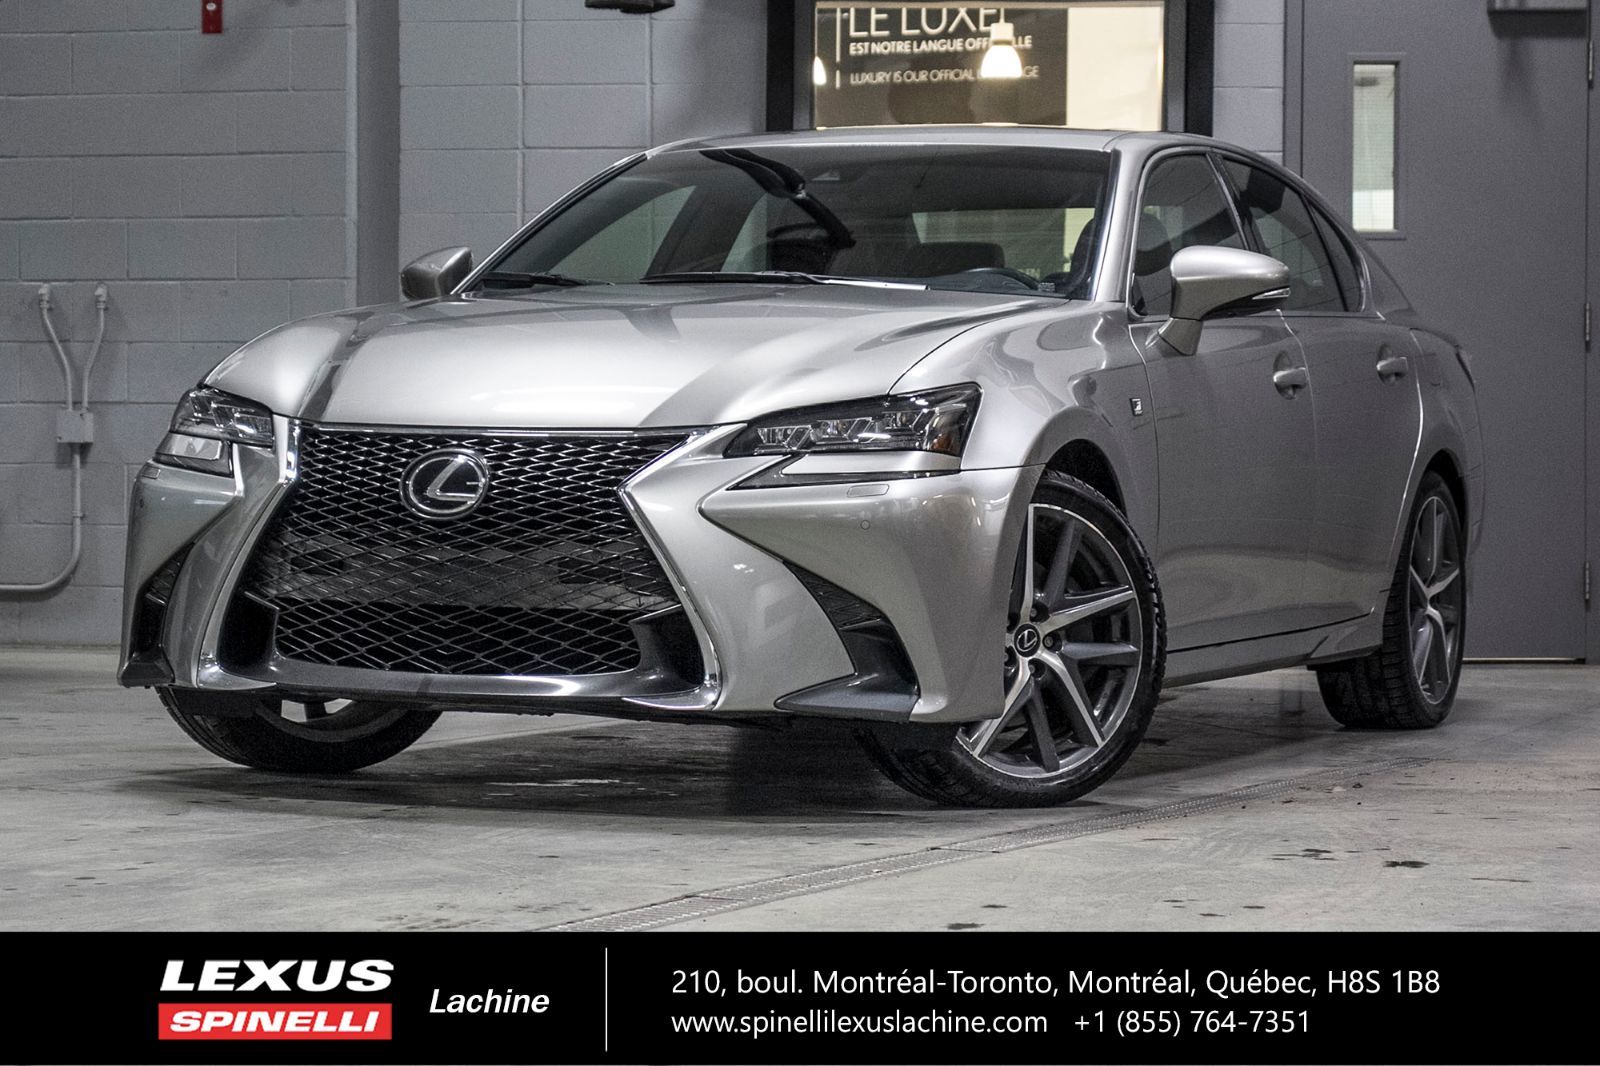 Used 2016 Lexus GS 350 F SPORT II AWD;19' MAGS TOIT GPS AUDIO LSS+ for